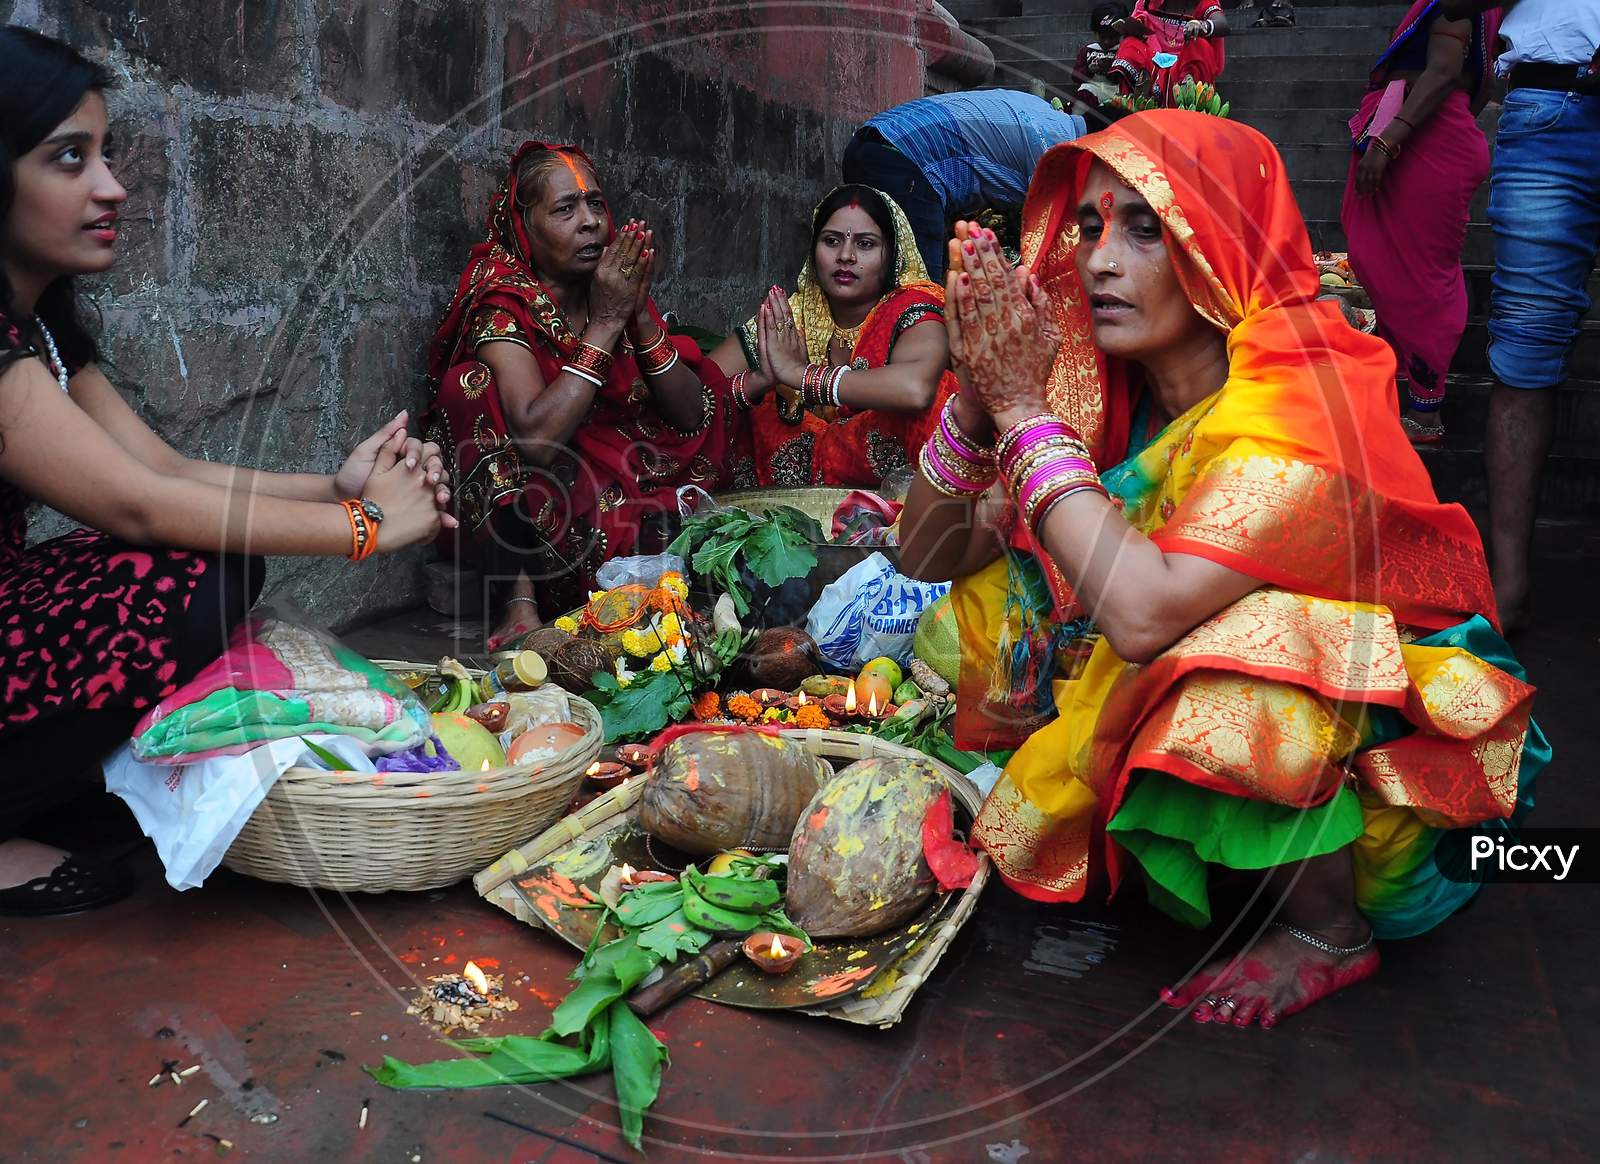 The devotees are celebrating Chat ritual.